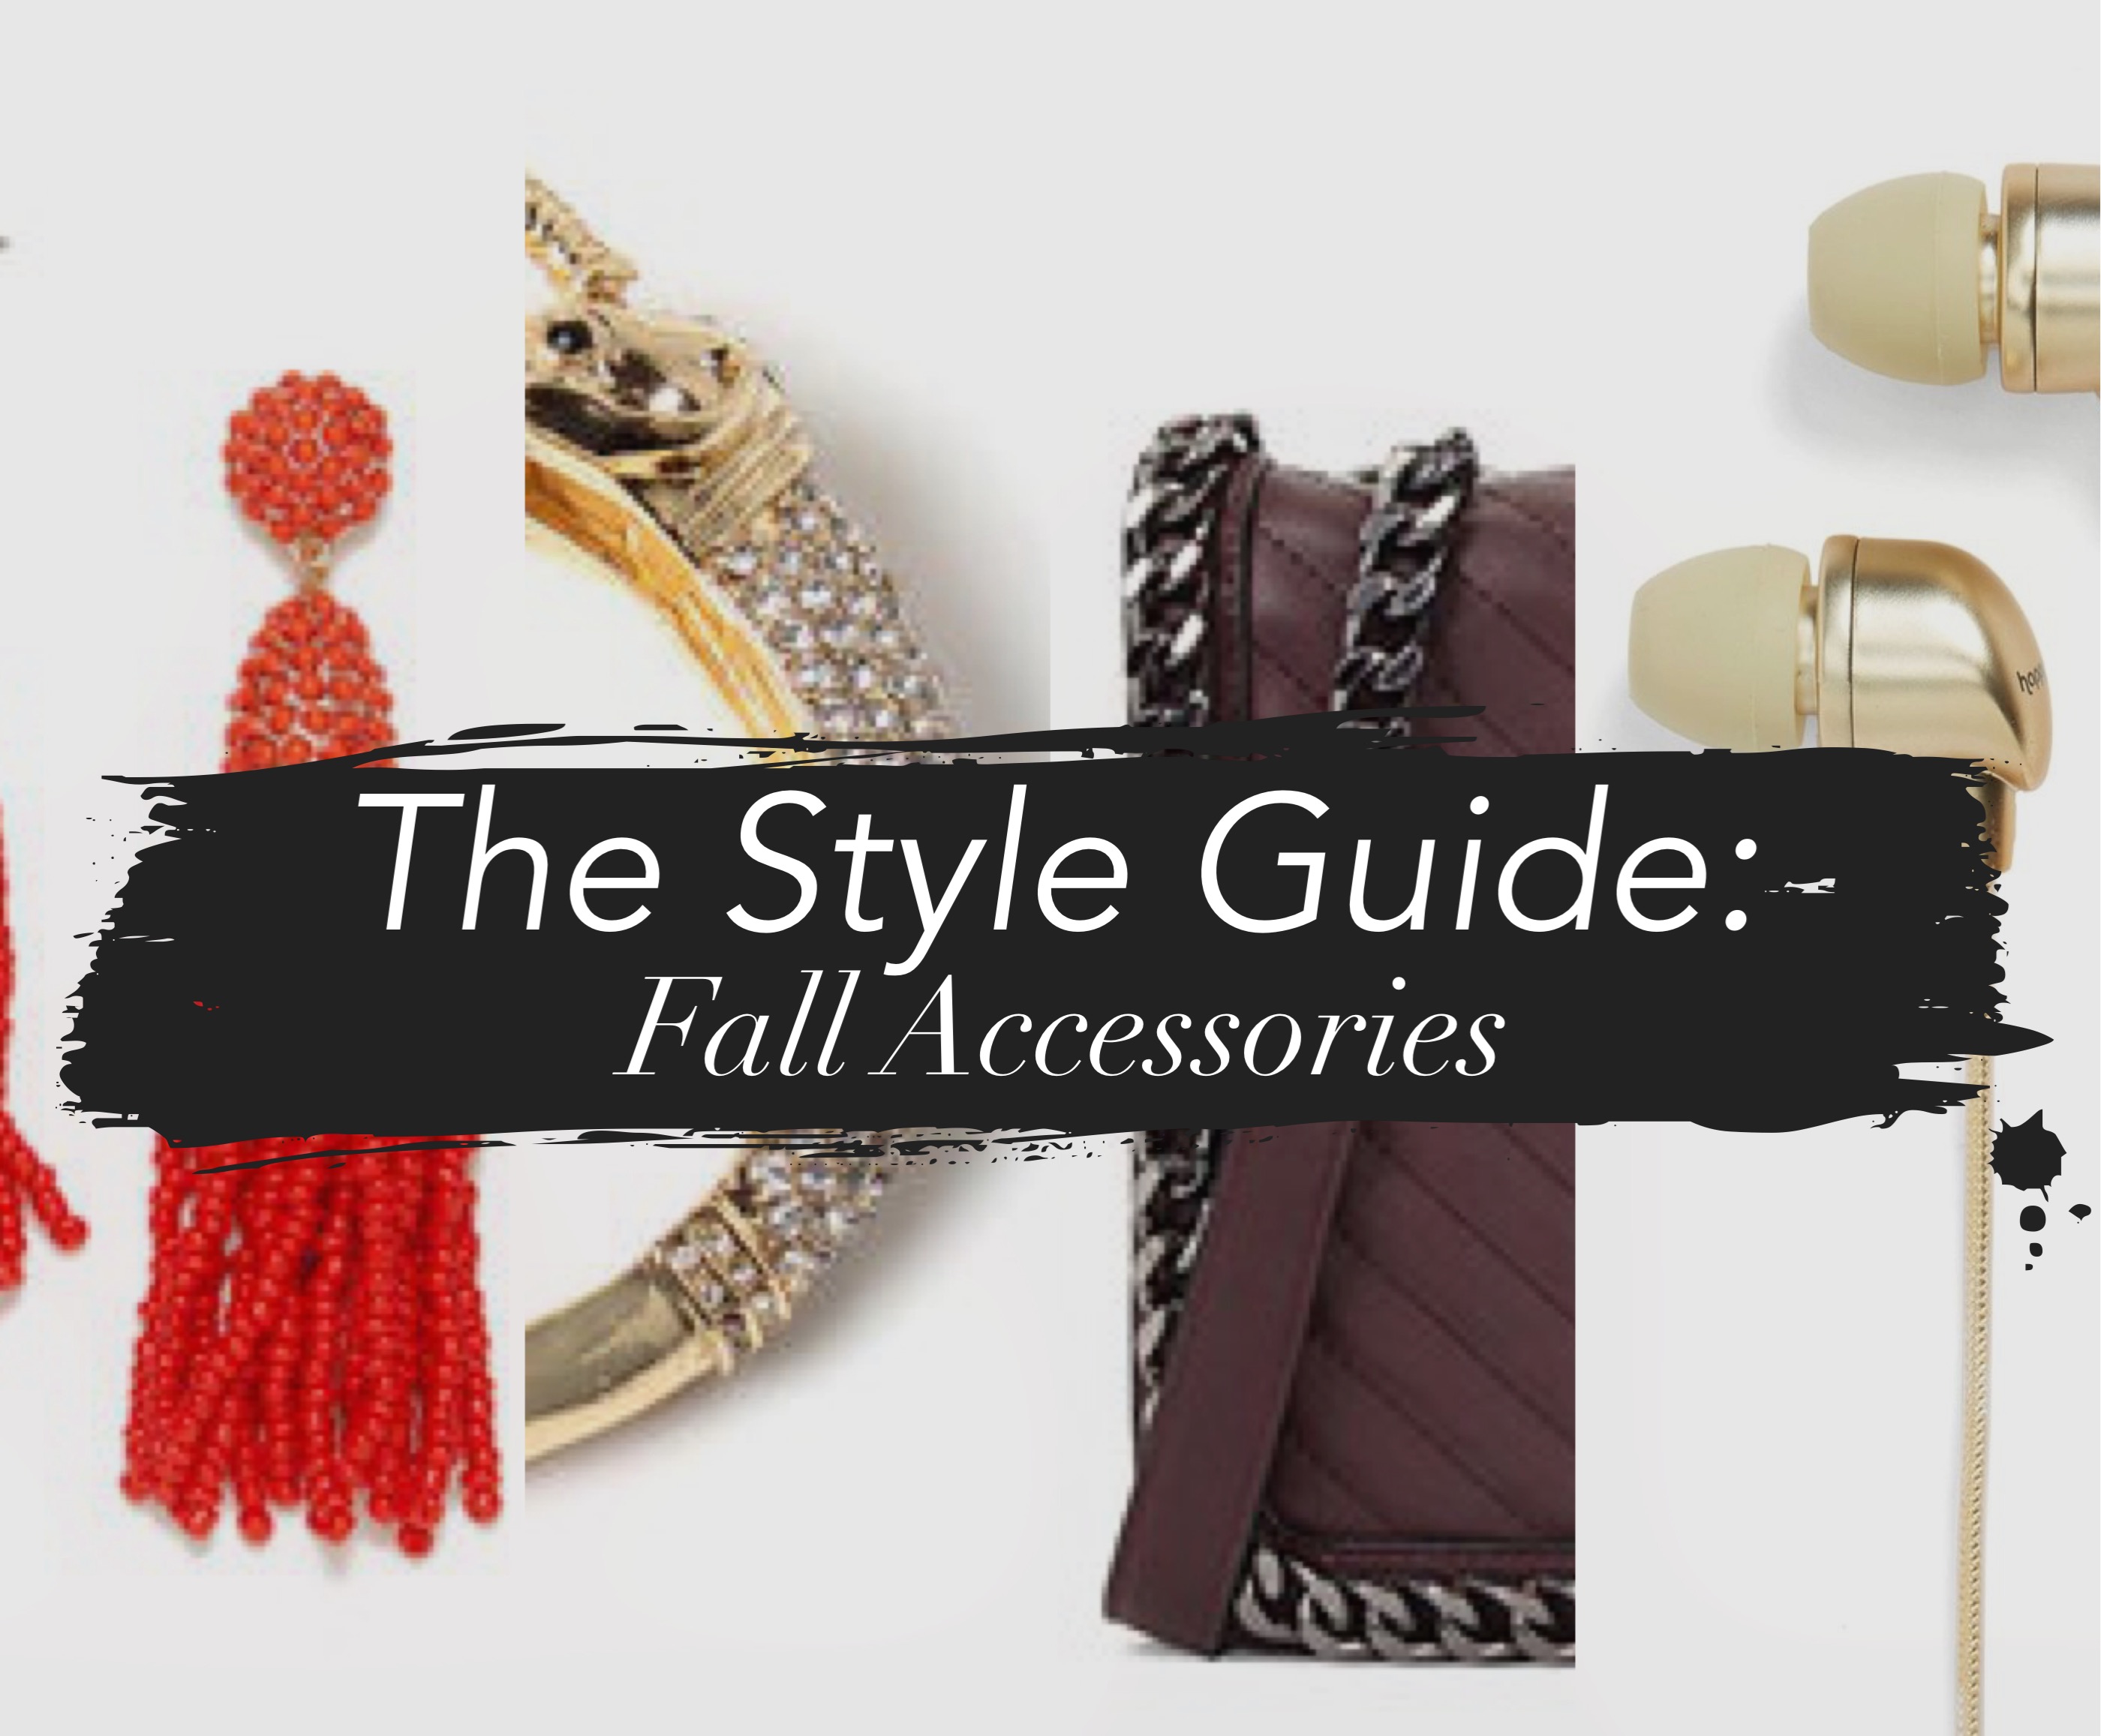 Best Fall accessories to buy, fall shopping guide, christmas gift shopping guide, norsdtrom gift shopping guide, amrita sigh, aldo bags, baublebar